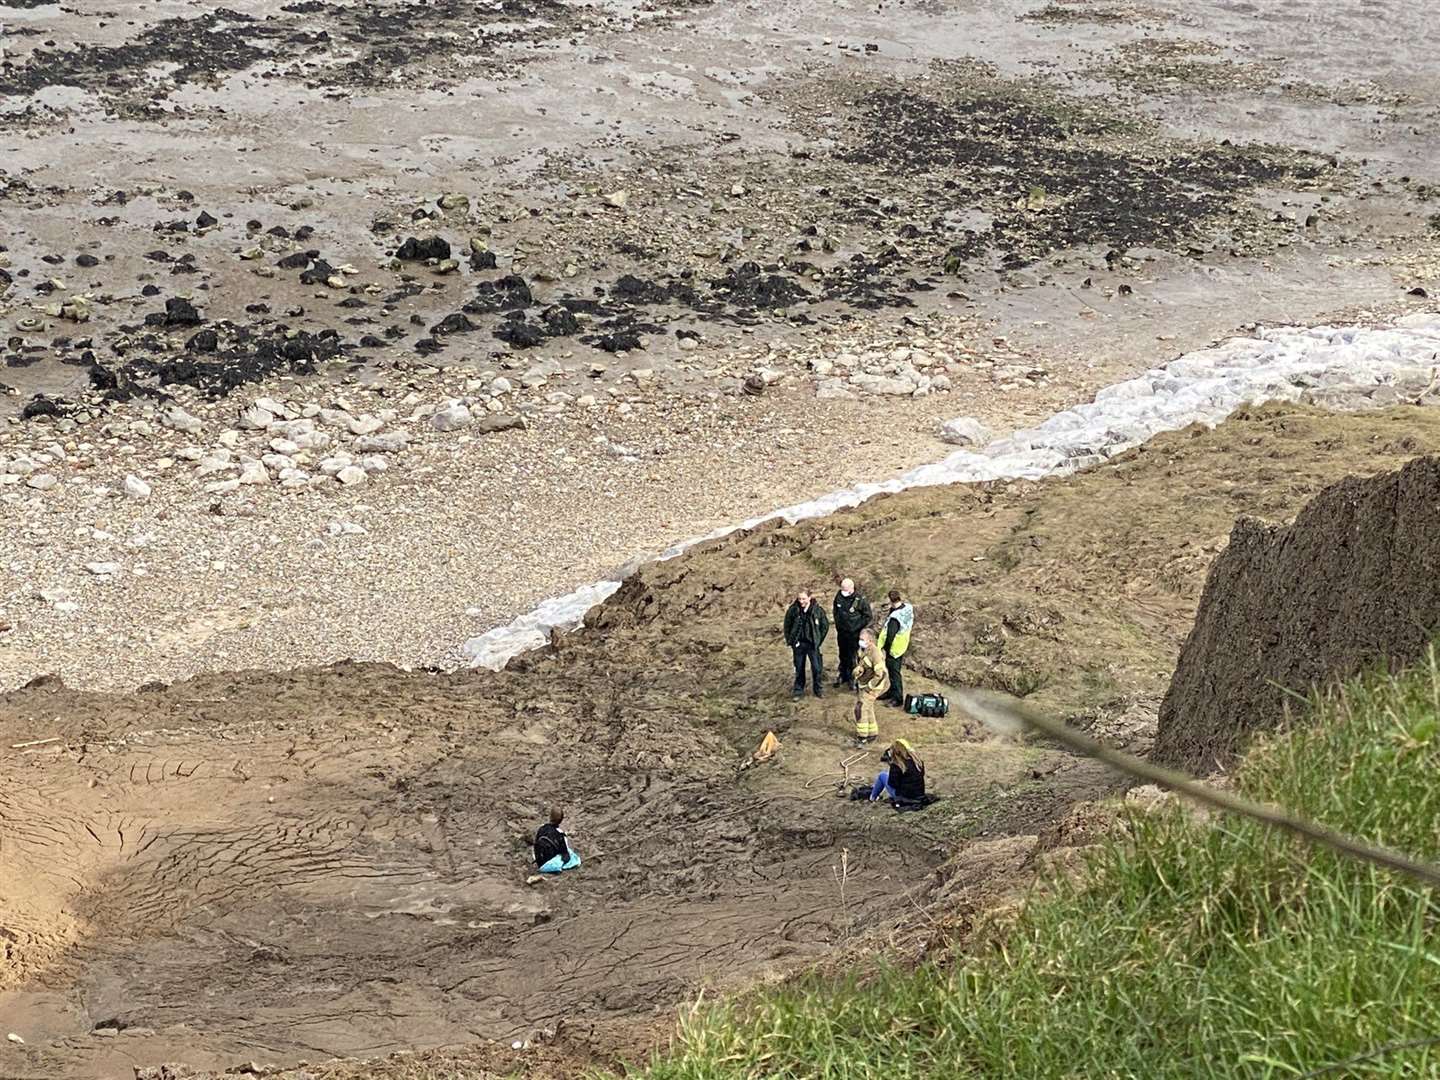 The mud rescue in Warden, Sheppey. Picture: Dr Paula Owens